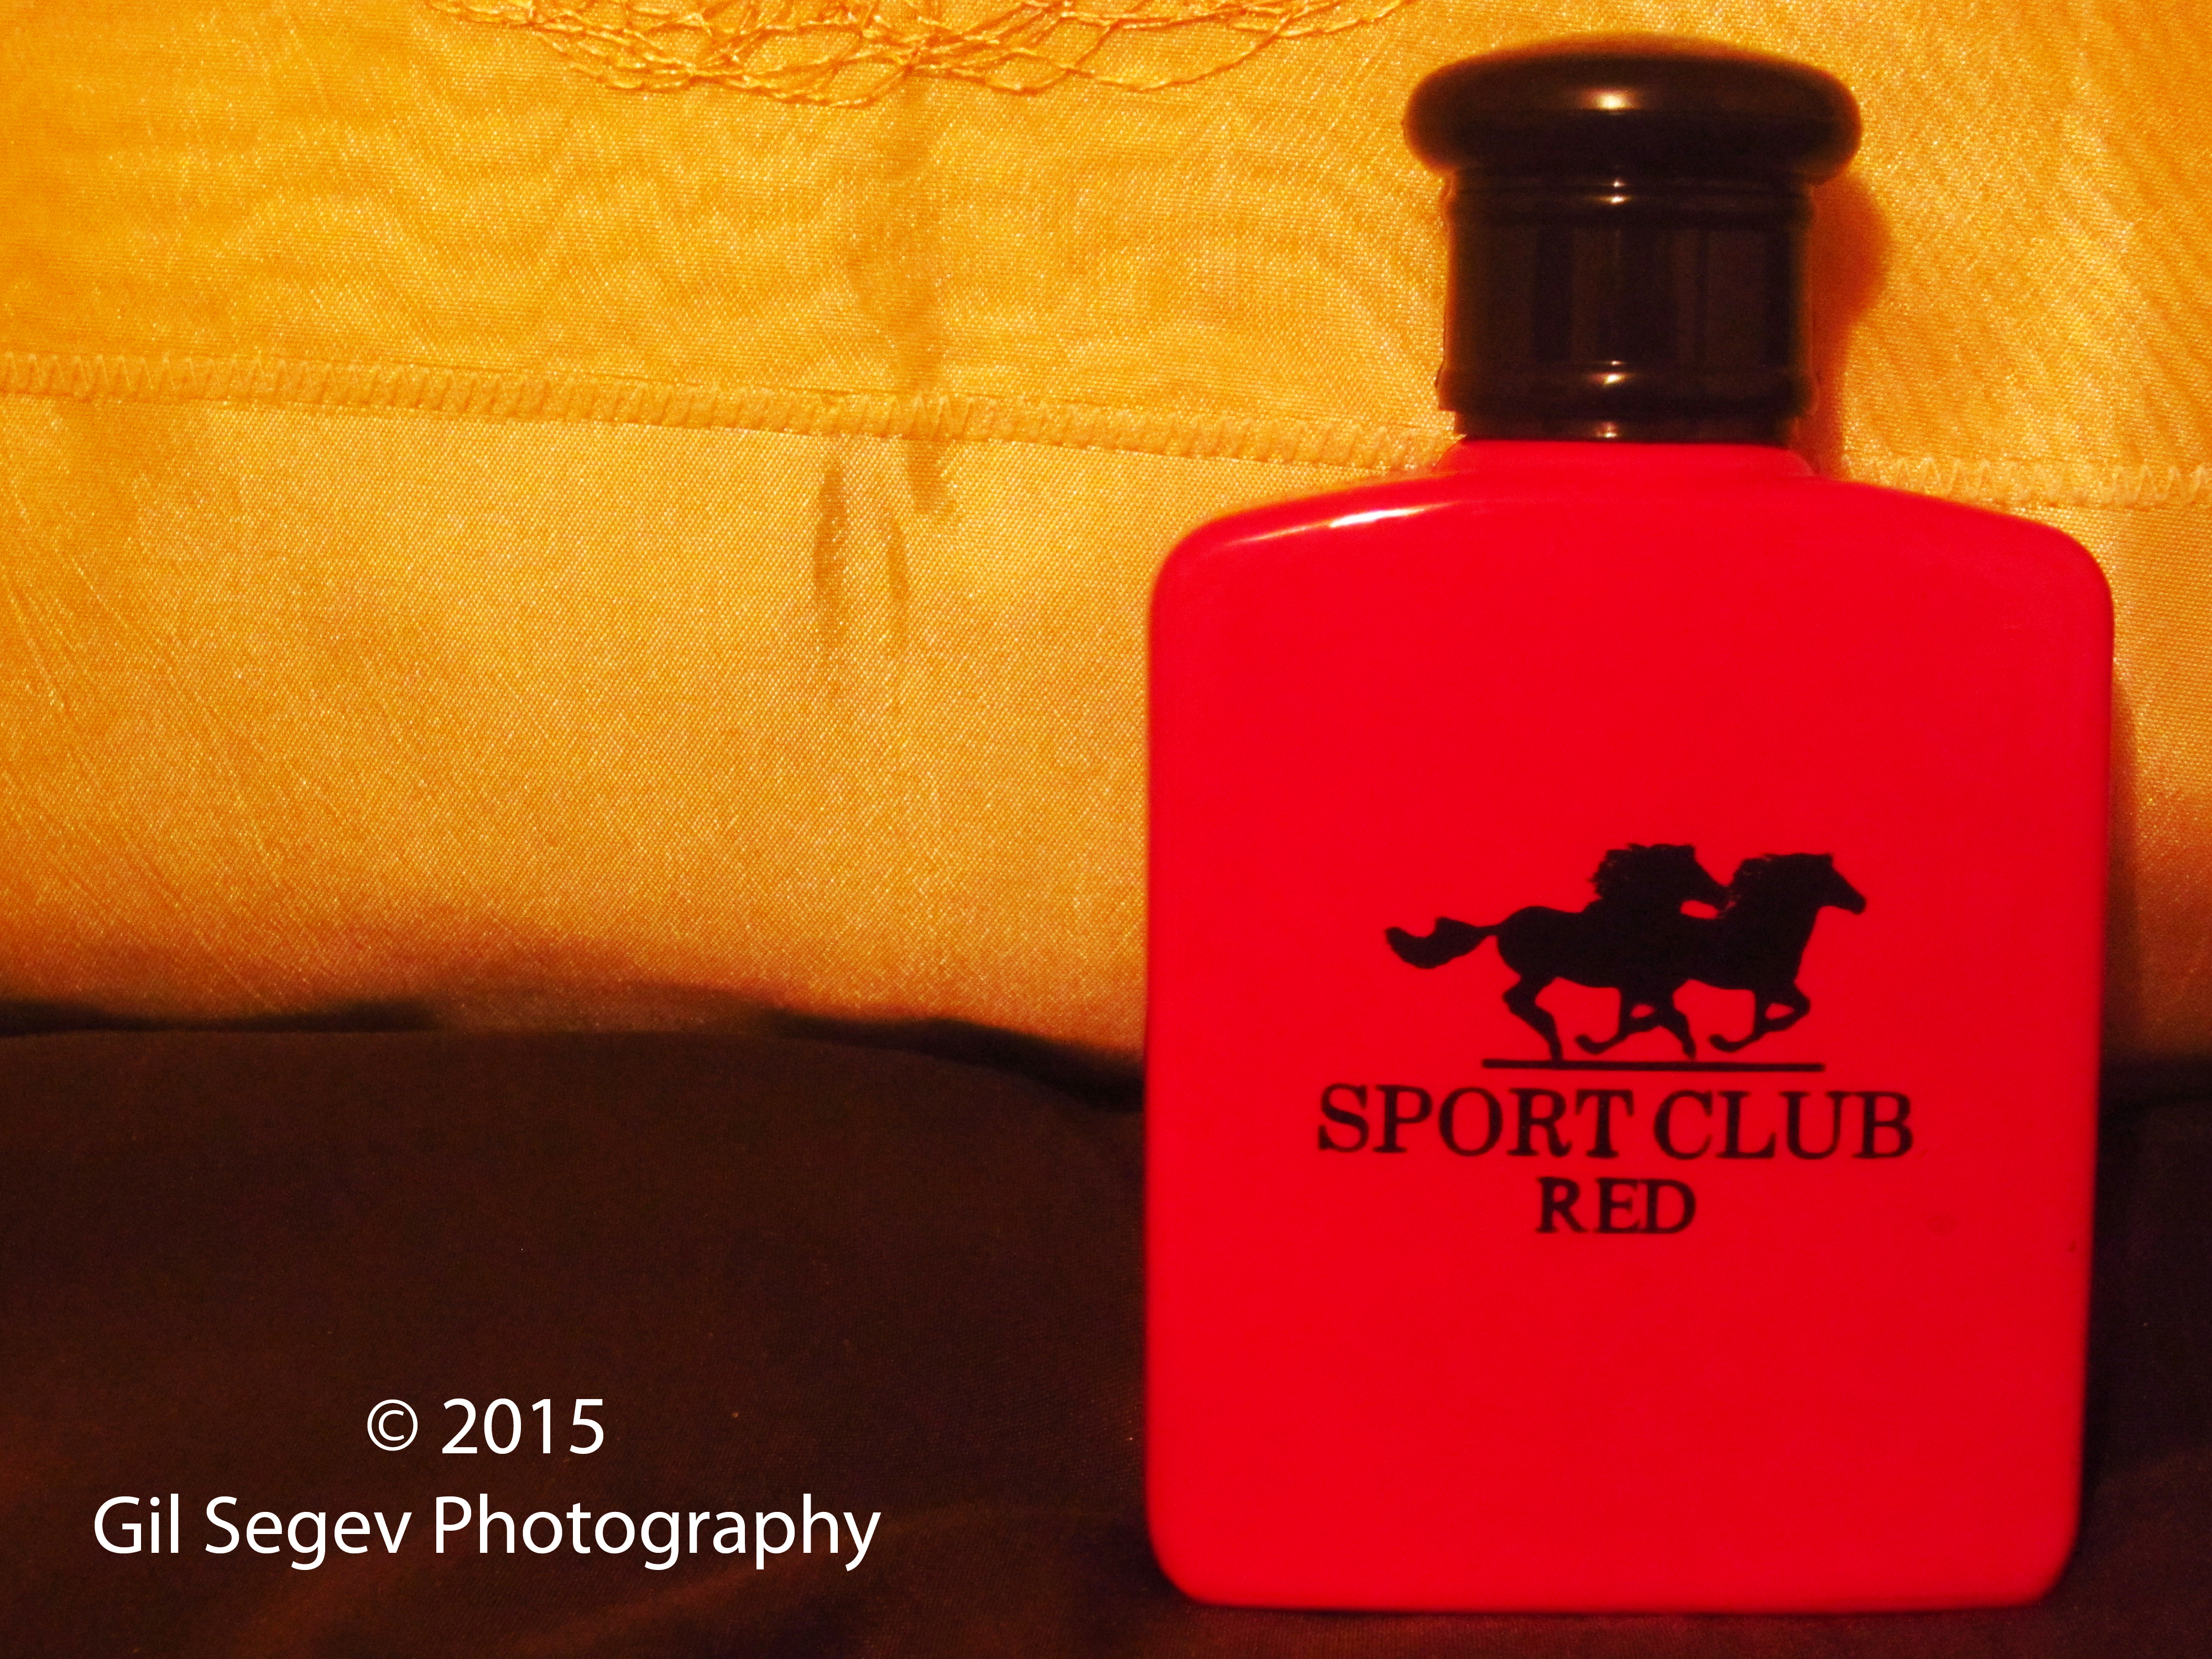 polo red sport cologne